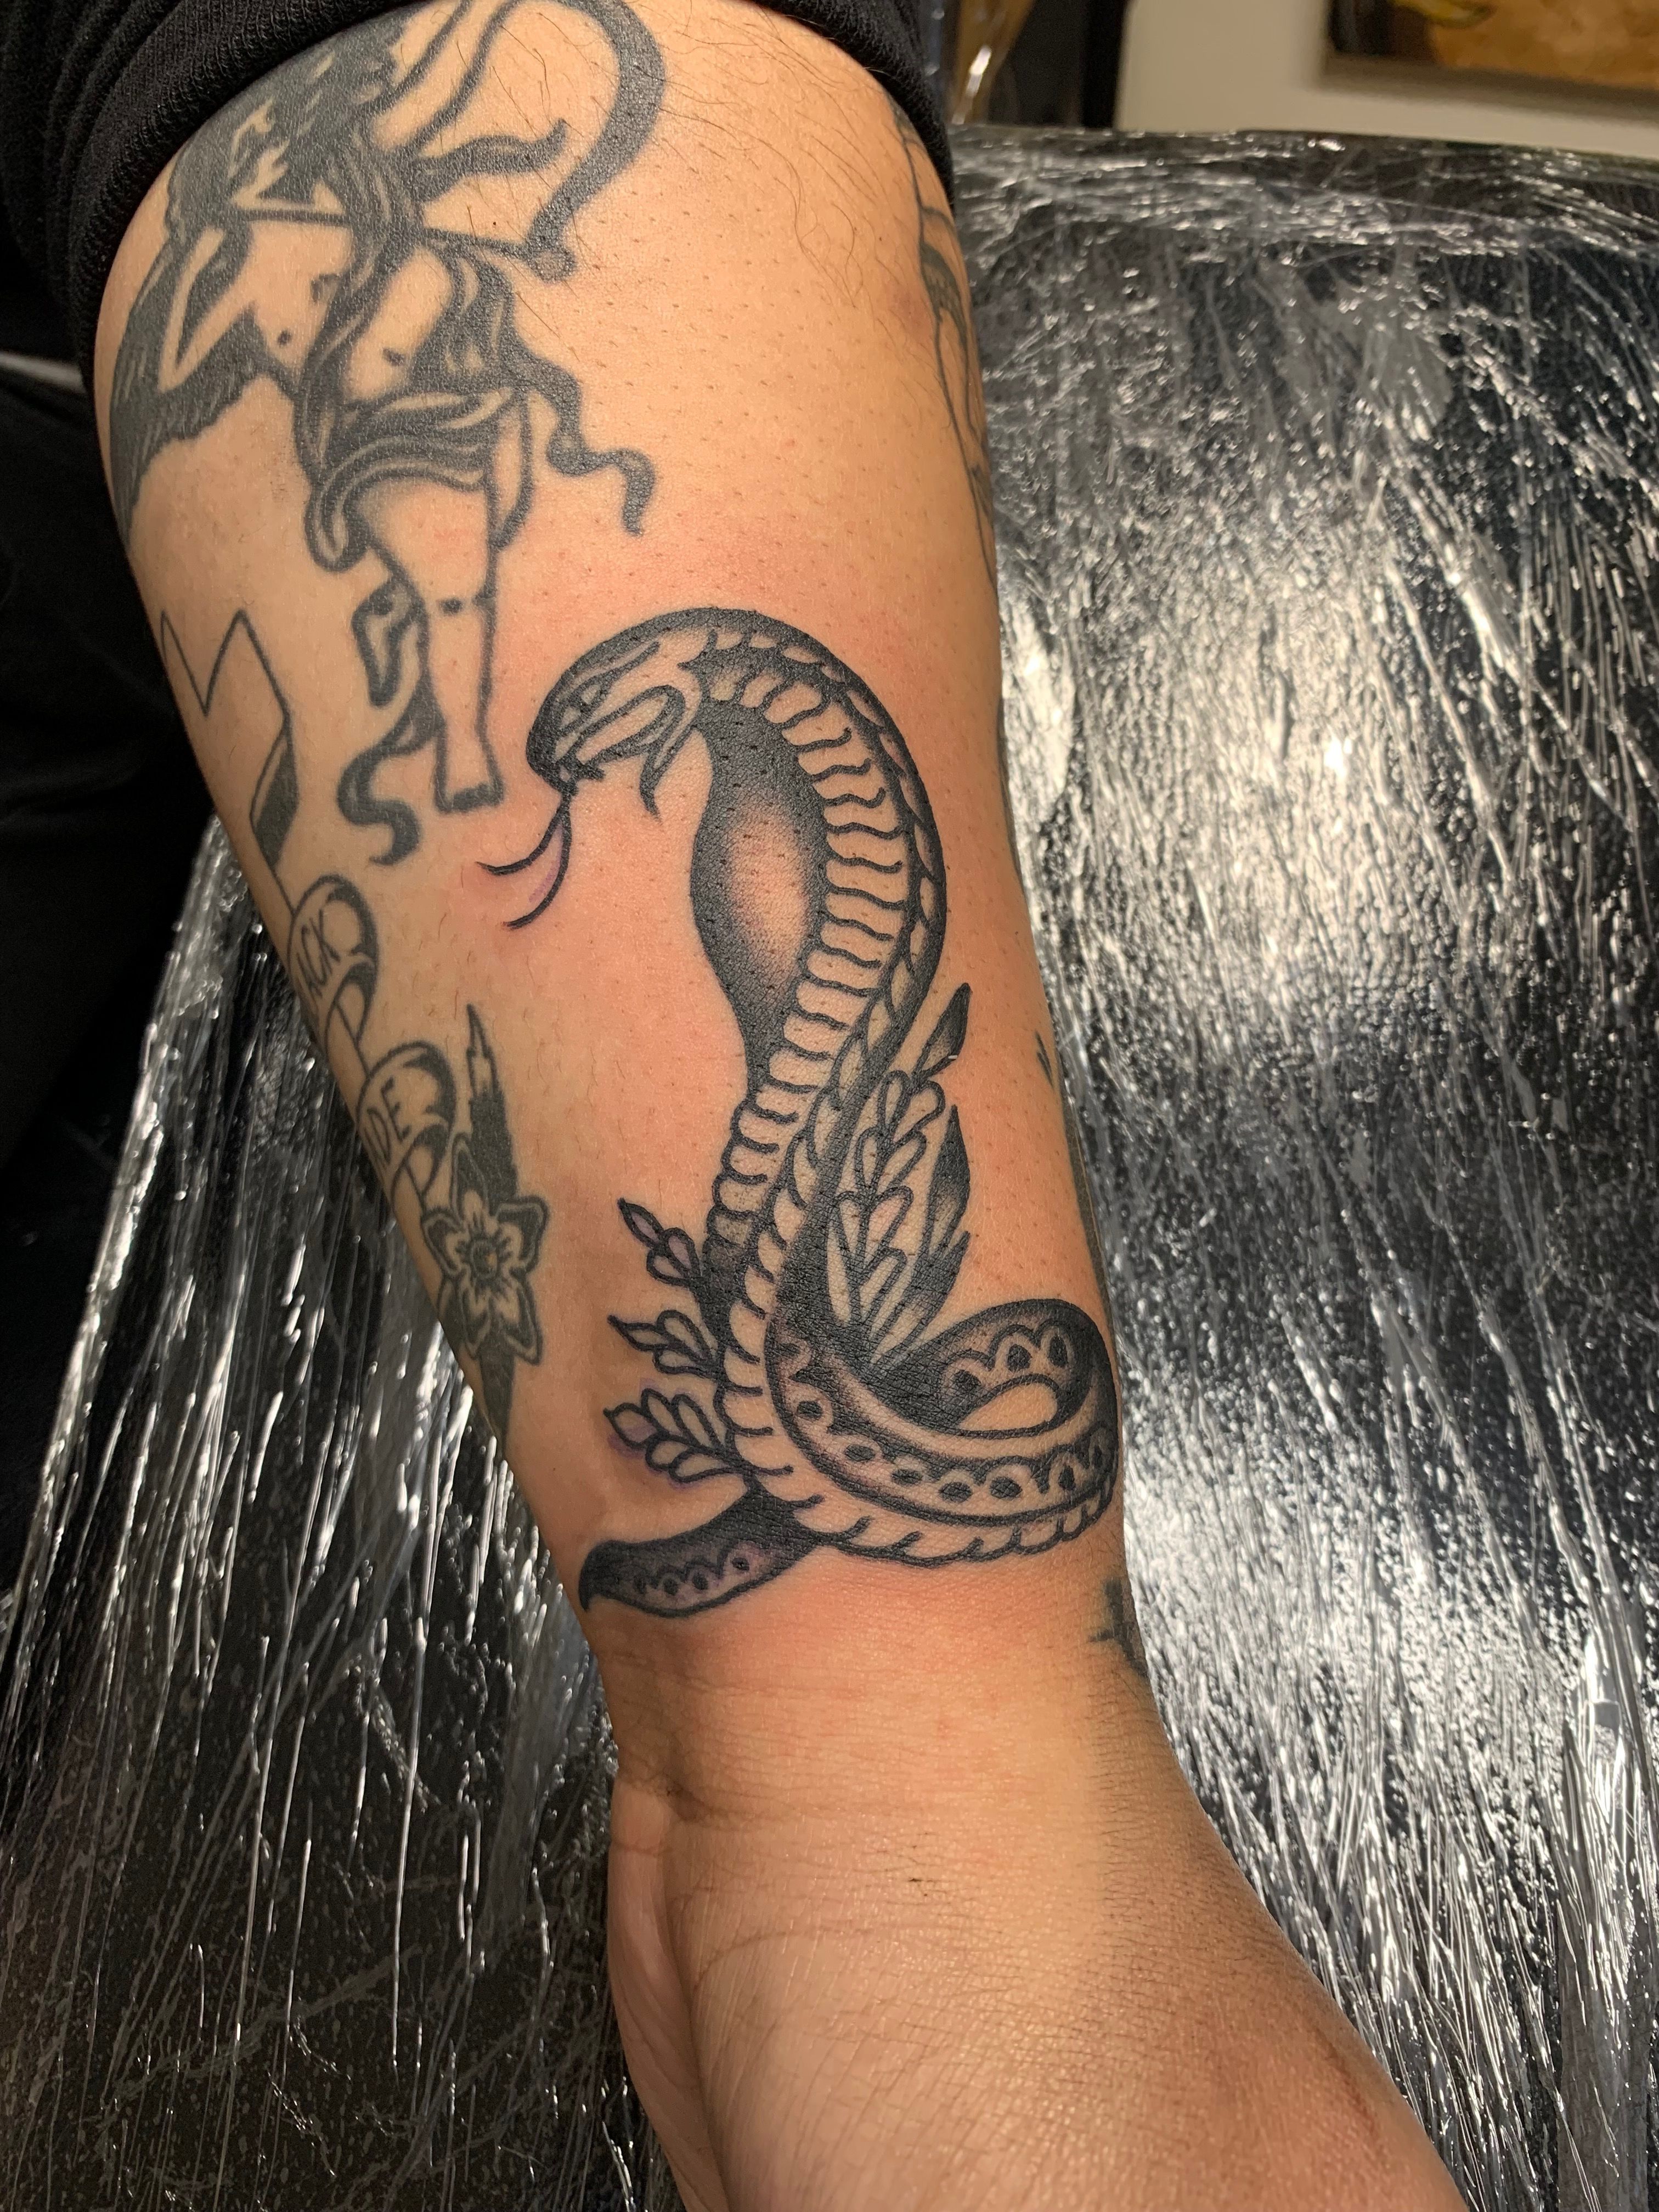 Does this snake tattoo have meaning behind it? : r/TattooDesigns